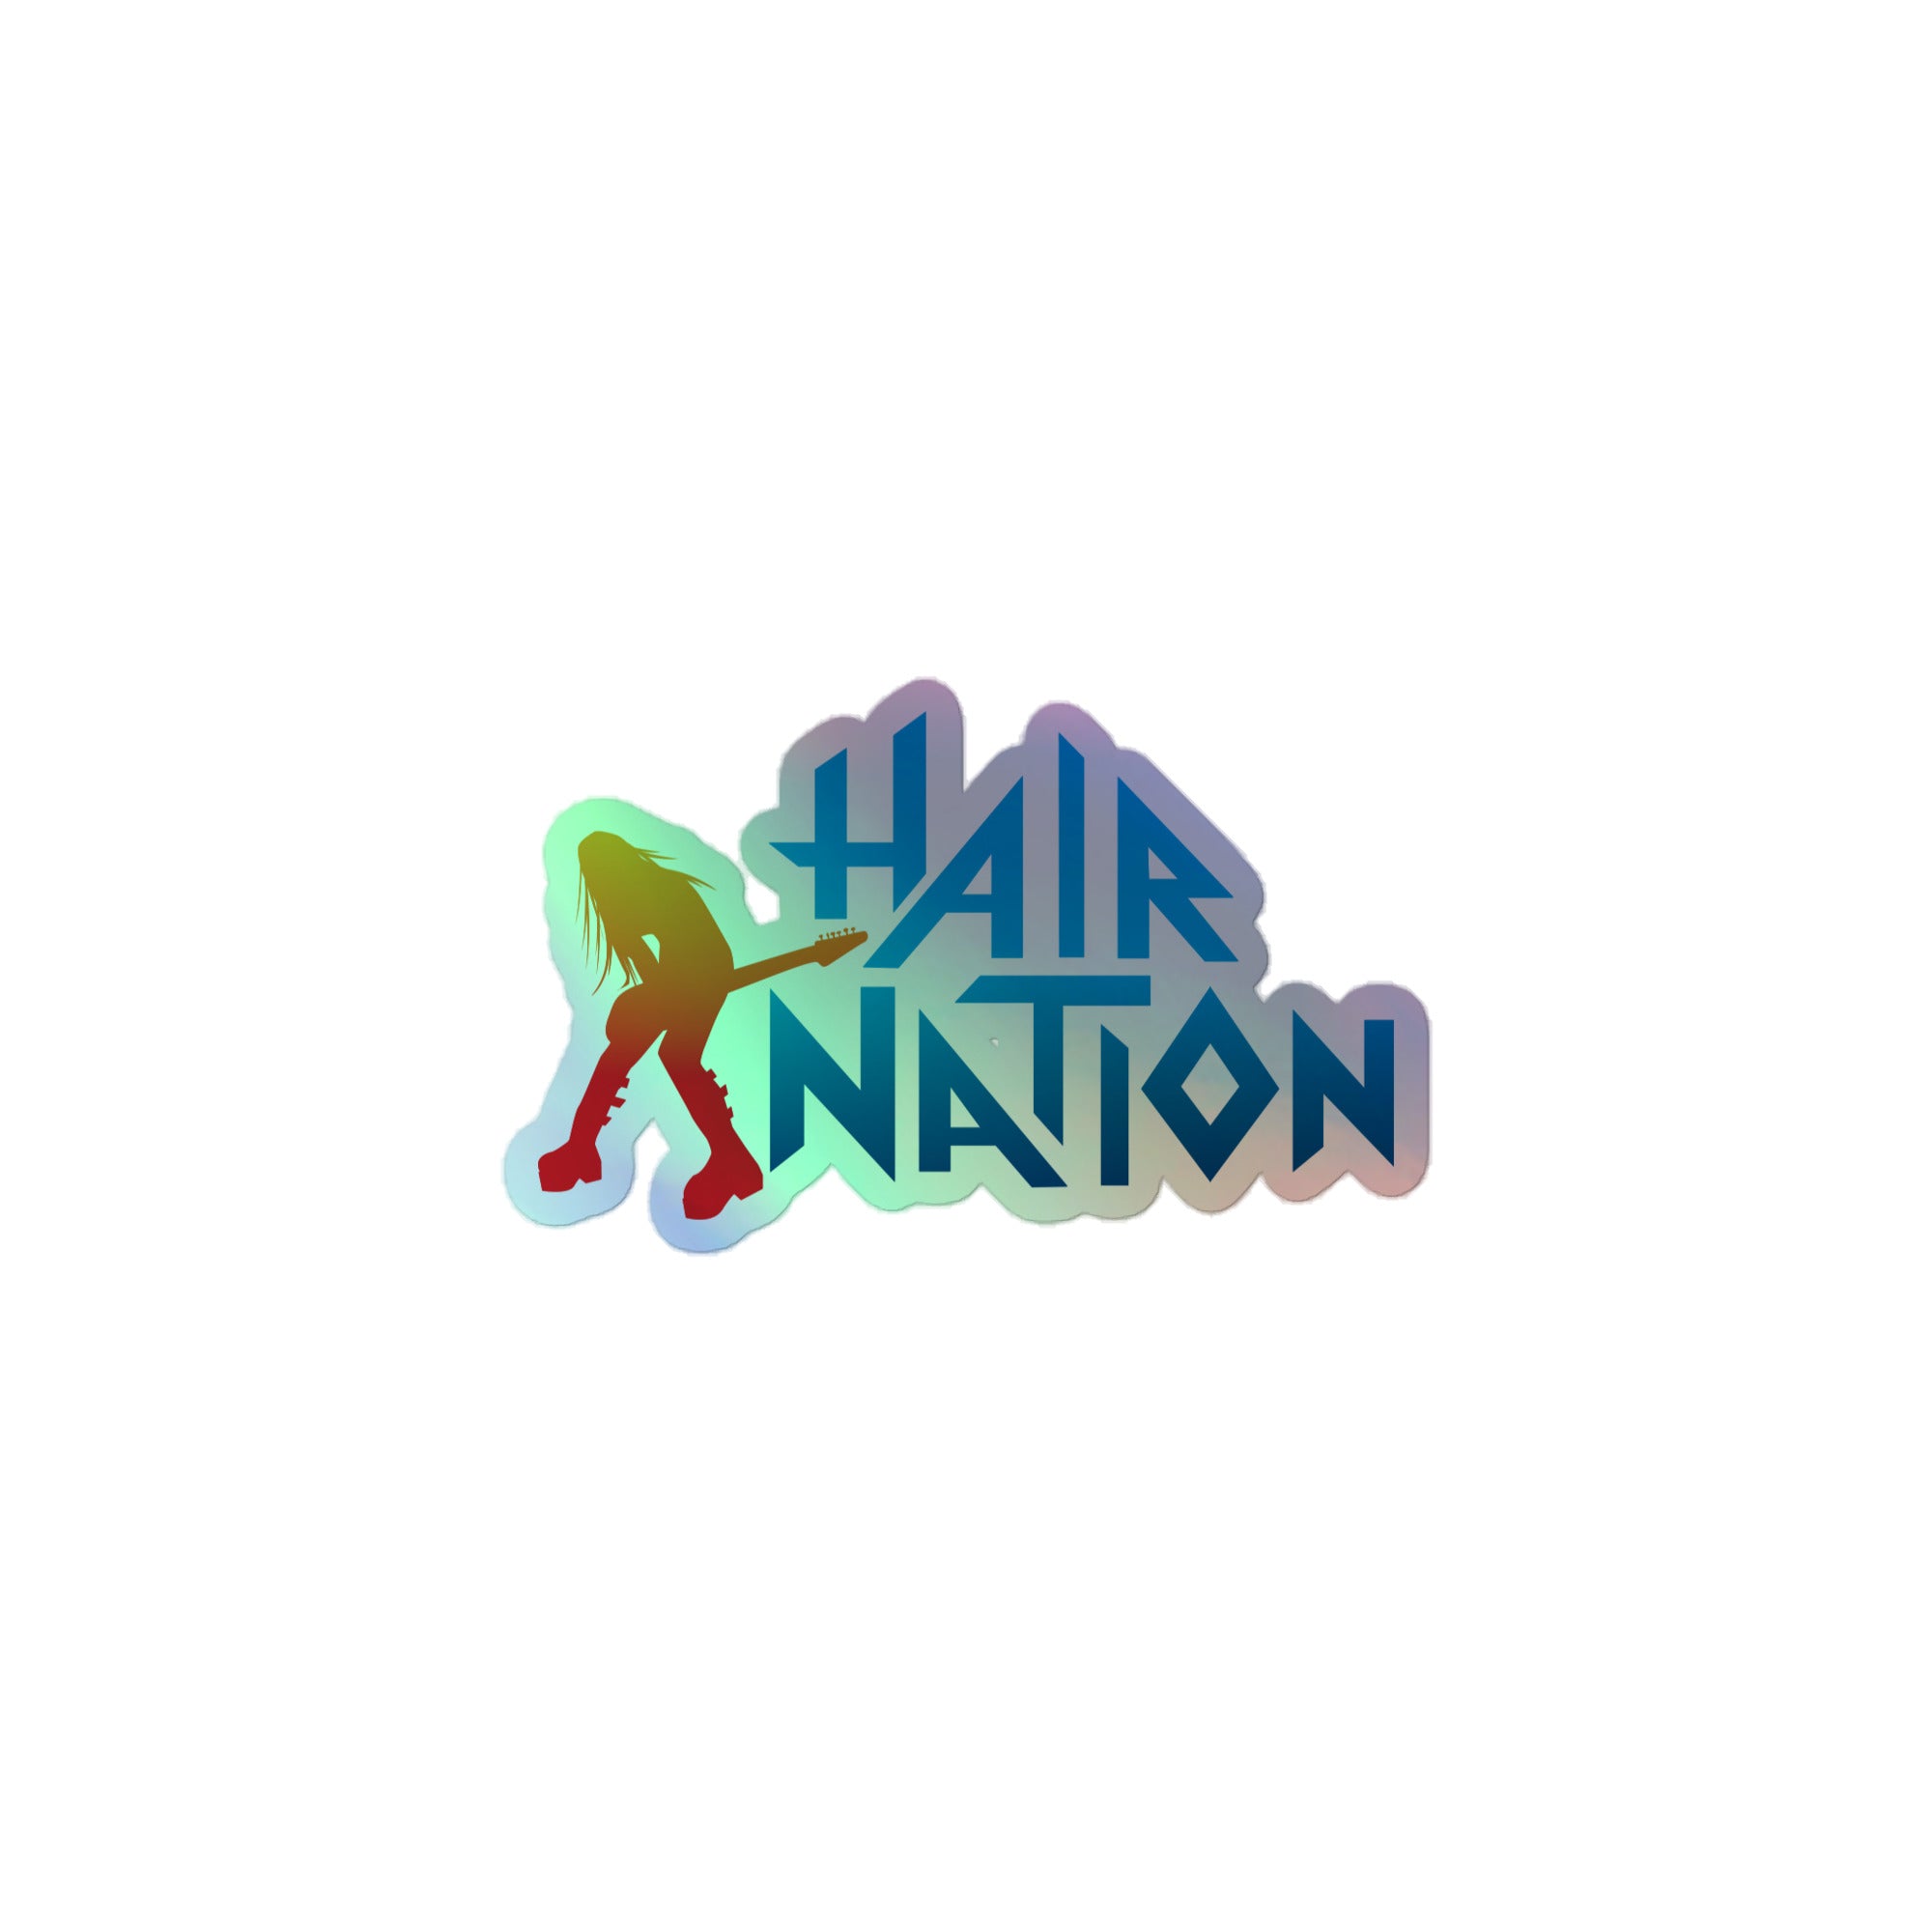 Hair Nation: Holographic Sticker